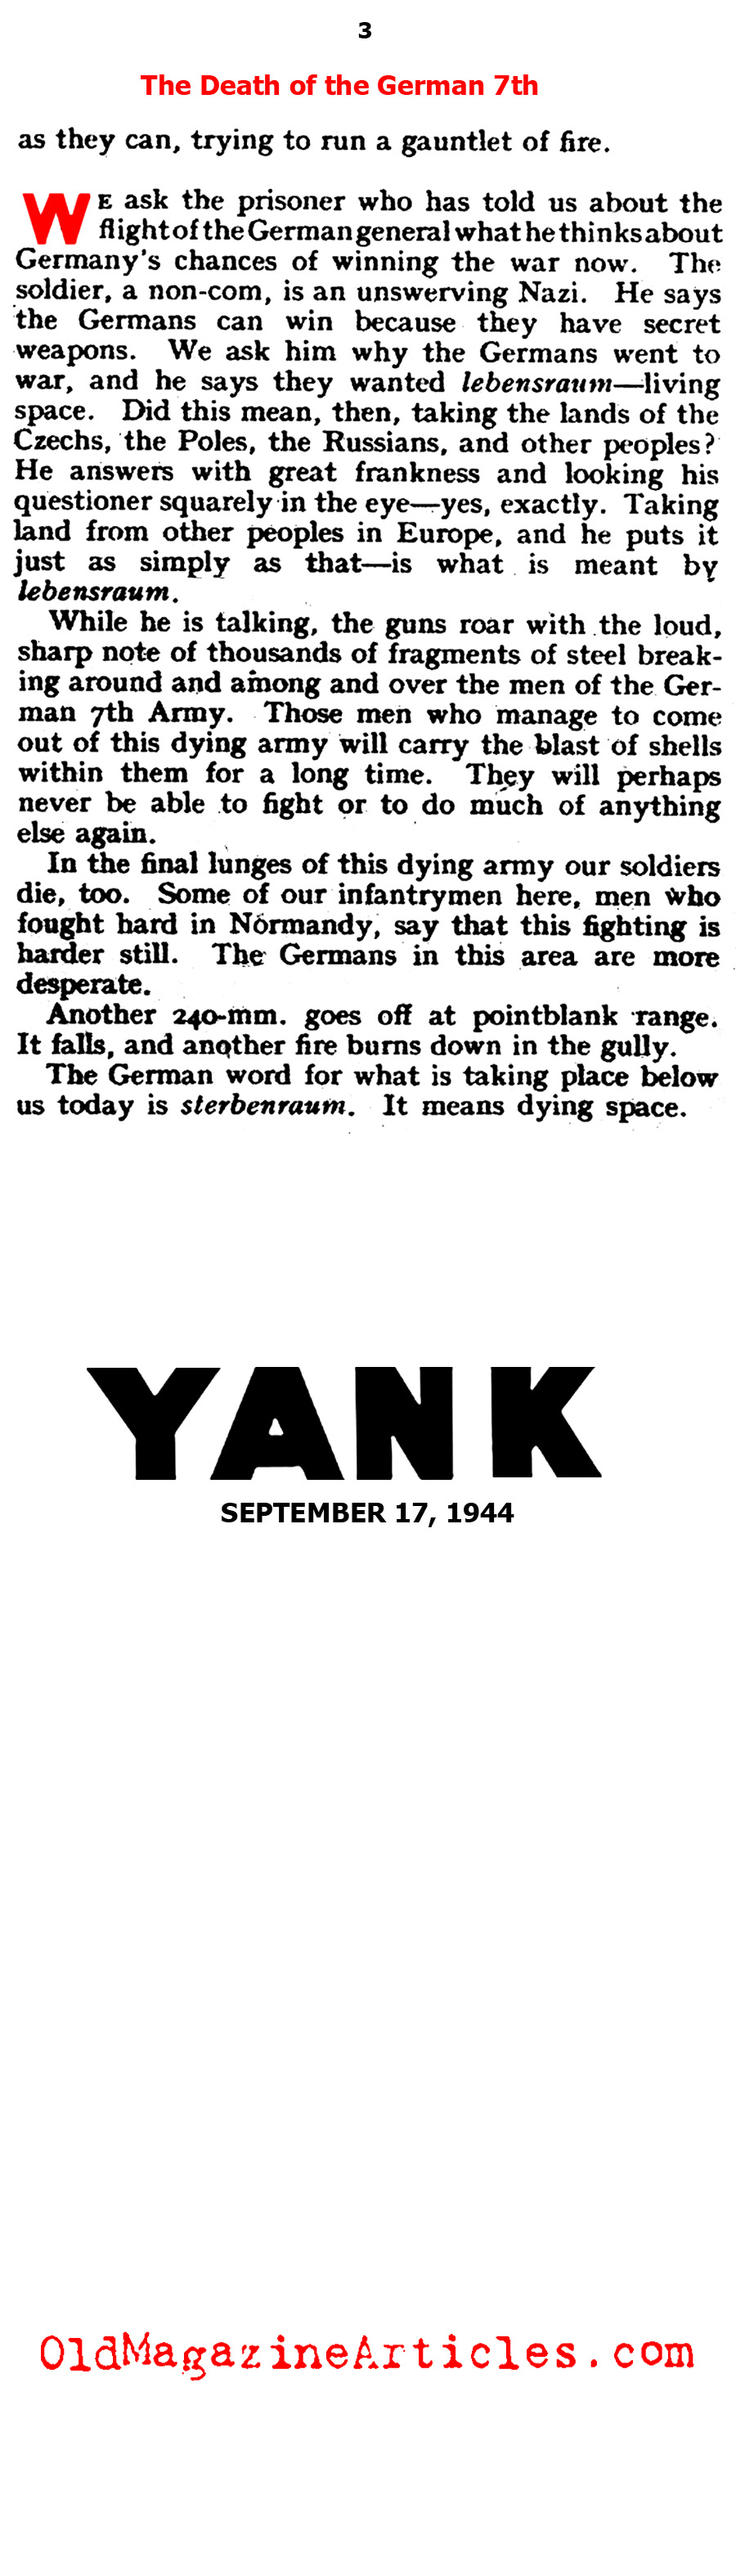 The Death of the German Seventh Army (Yank Magazine, 1944)